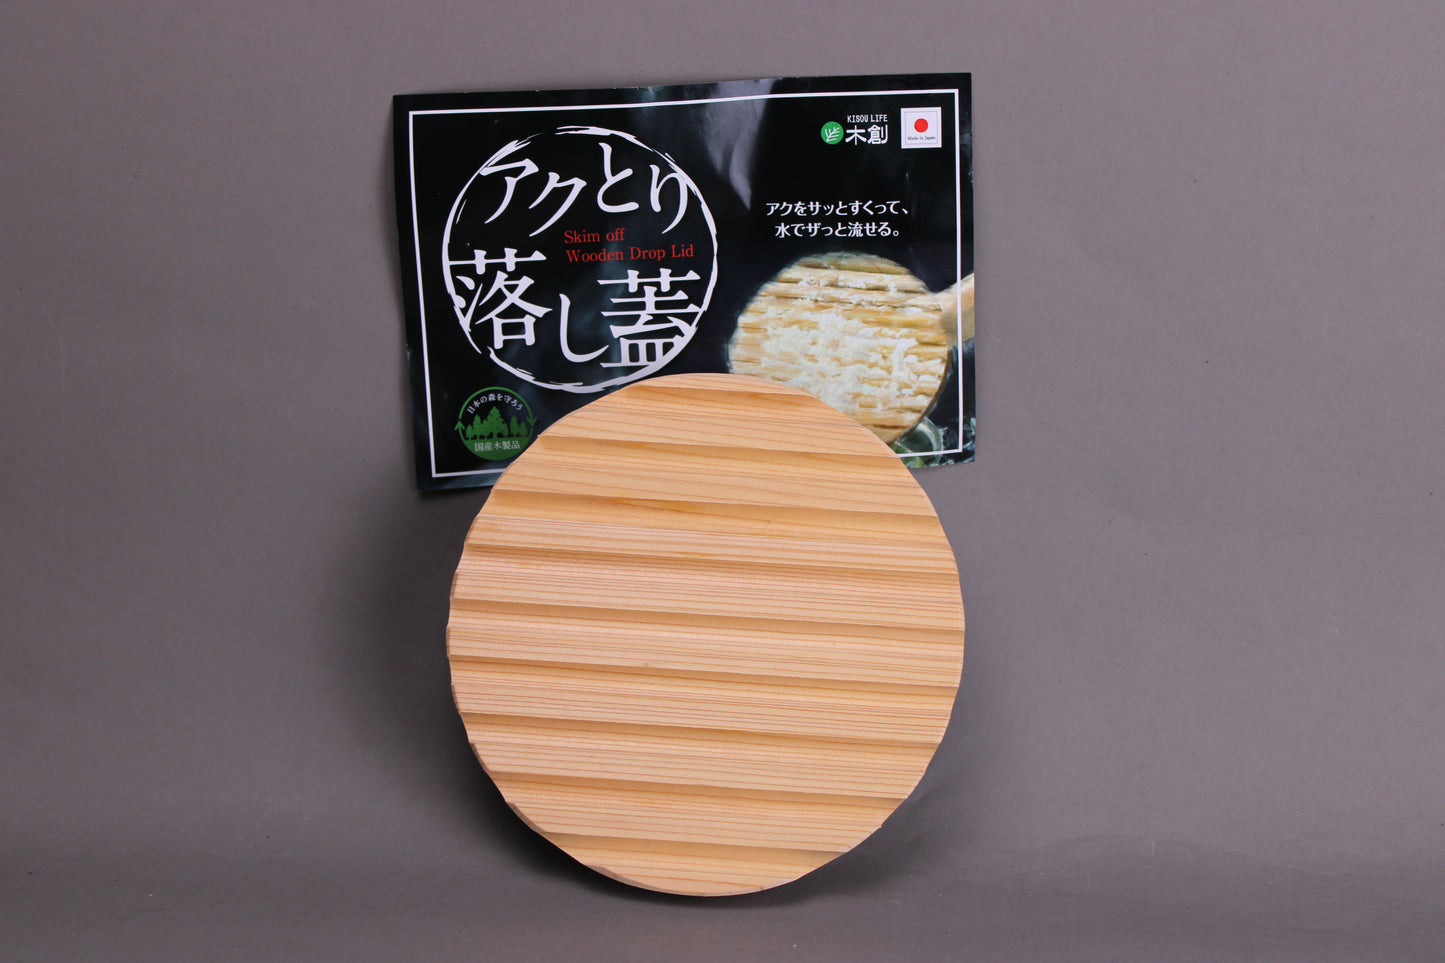 wooden drop lid skimmer otoshibuta for nimono by yamacoh youbi kisou life beside product paper with hiragana stating brand and product back side